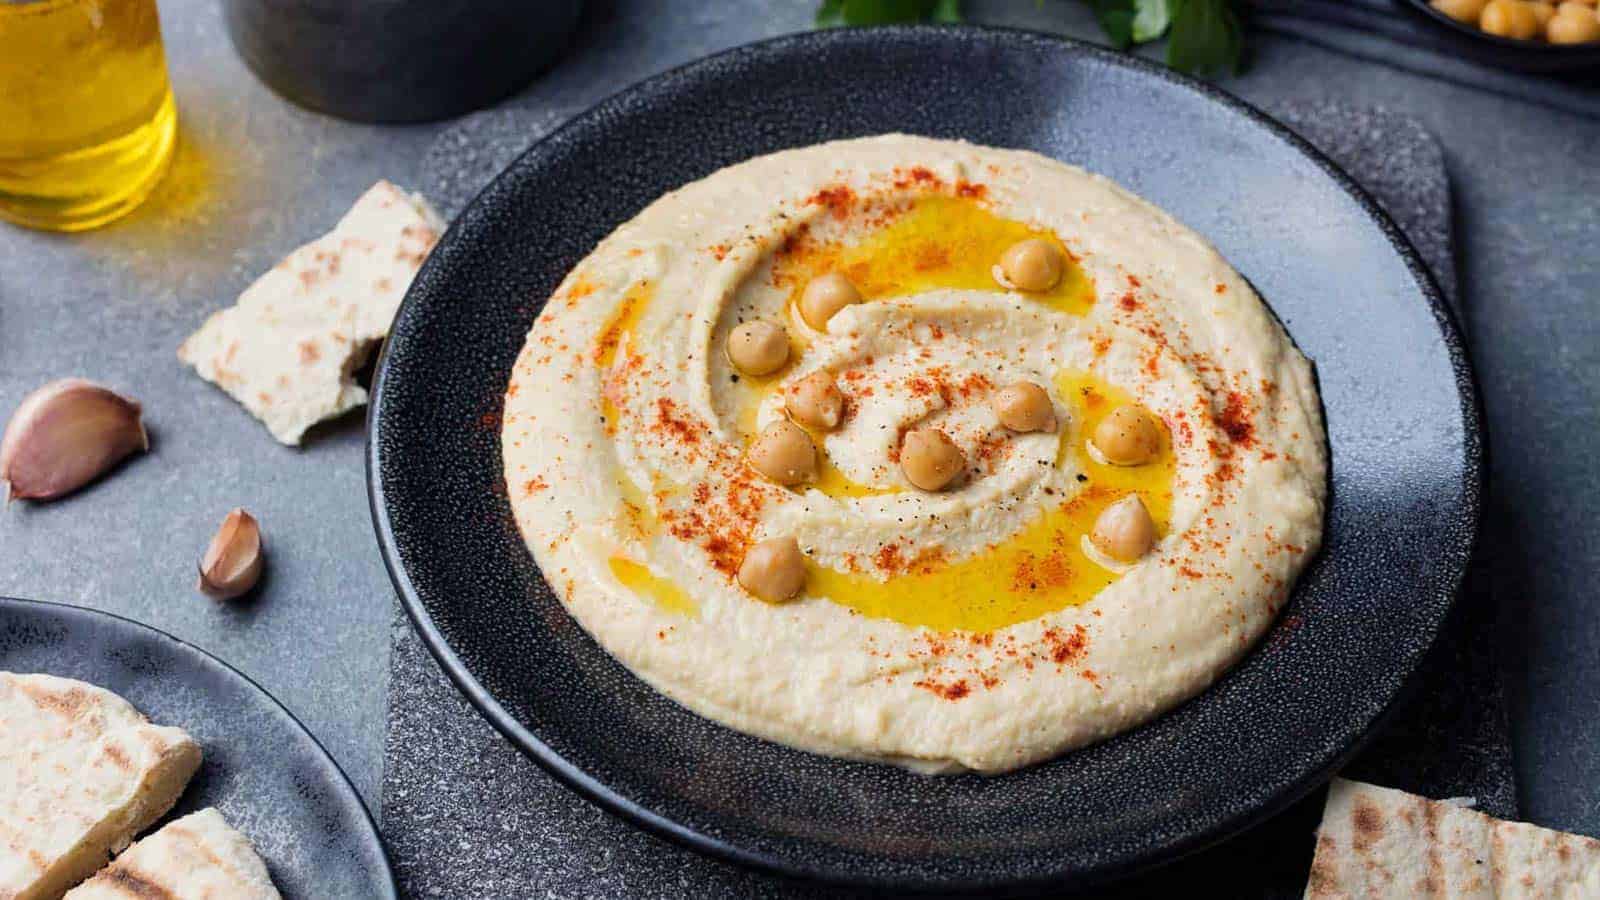 Hummus in a black bowl garnished with whole chickpeas, olive oil, and paprika.